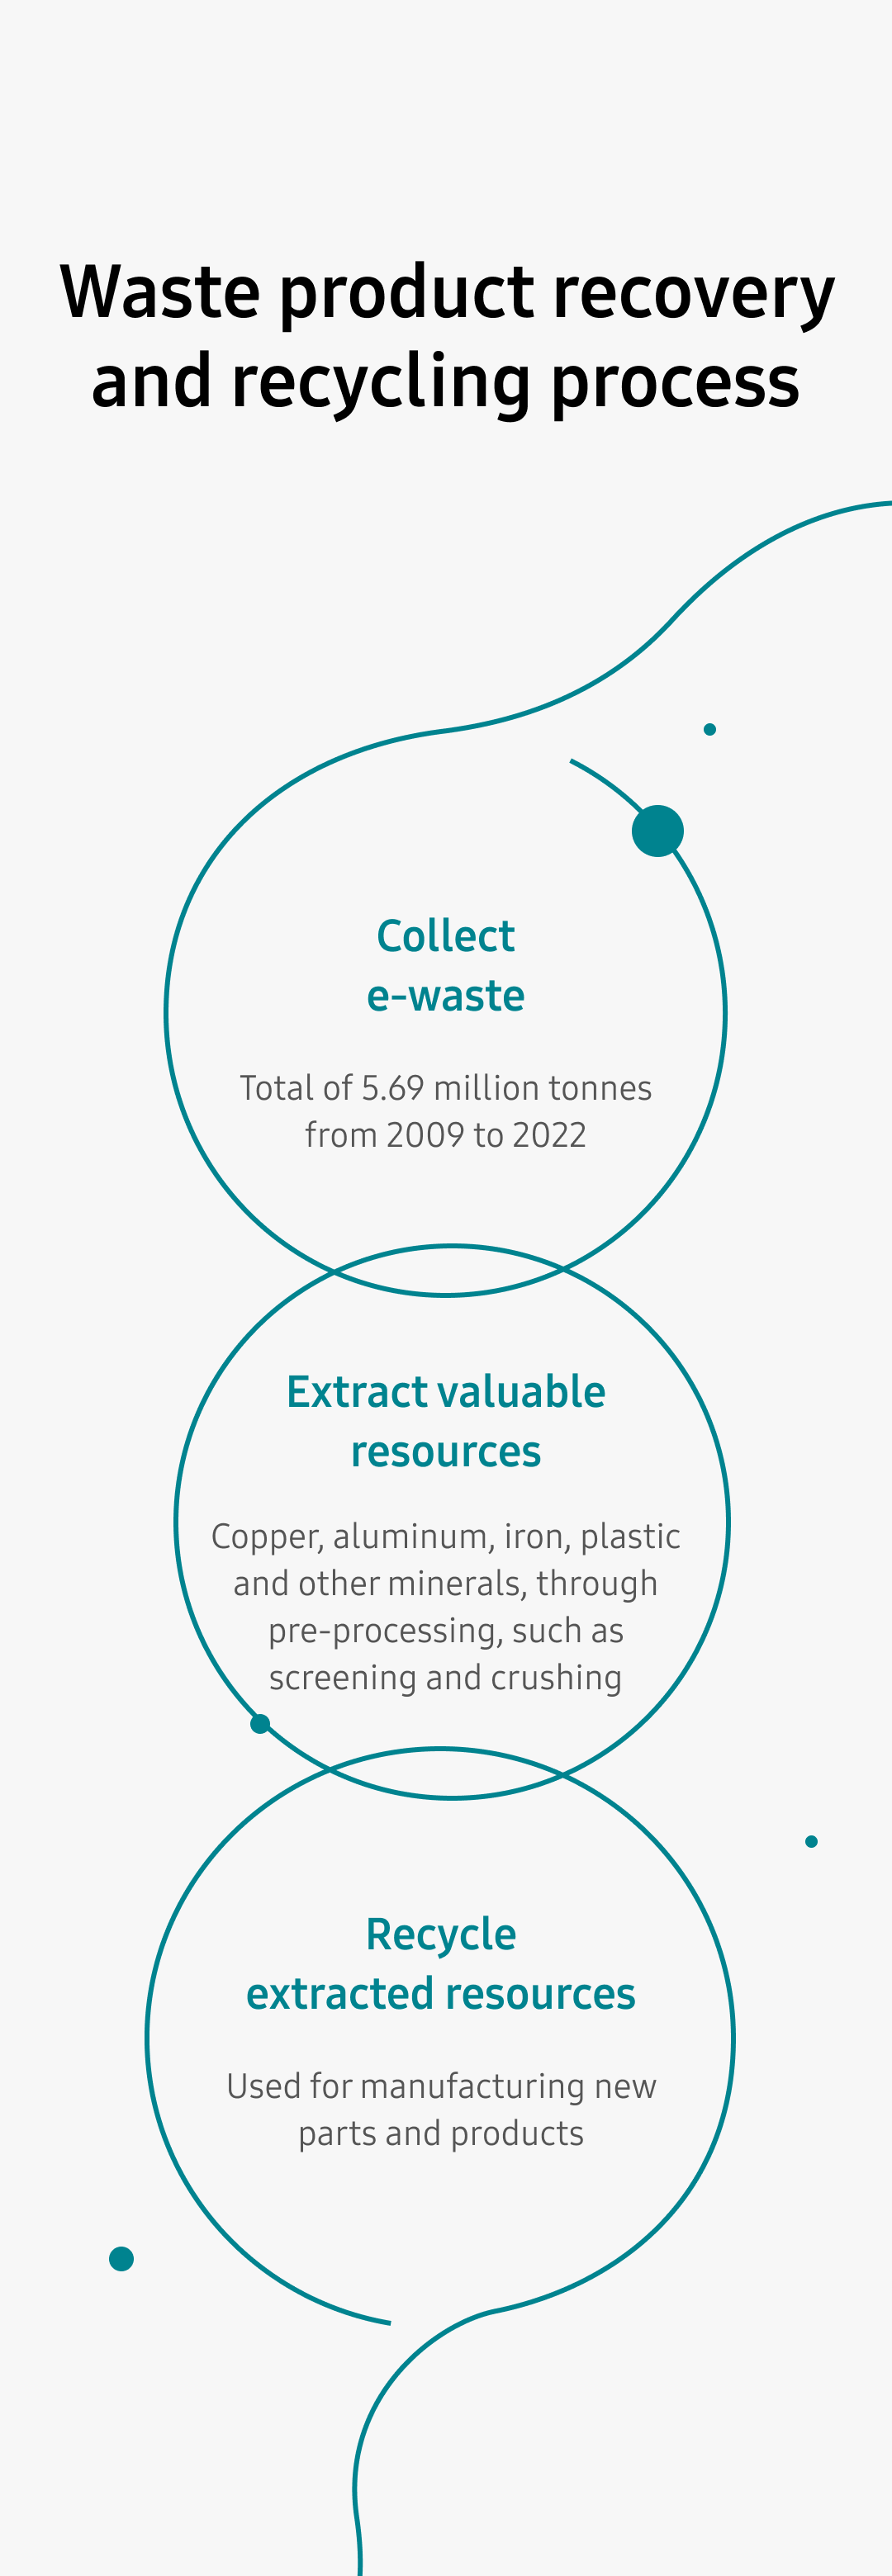 Collect e-waste Total of 5.07 million tonnes from 2009 to 2021, Extract valuable resources Cooper, aluminum, iron, plastic and other minerals, through pre-processing, such as screening and crushing, Recycle extracted resources Used for manufacturing new parts and products